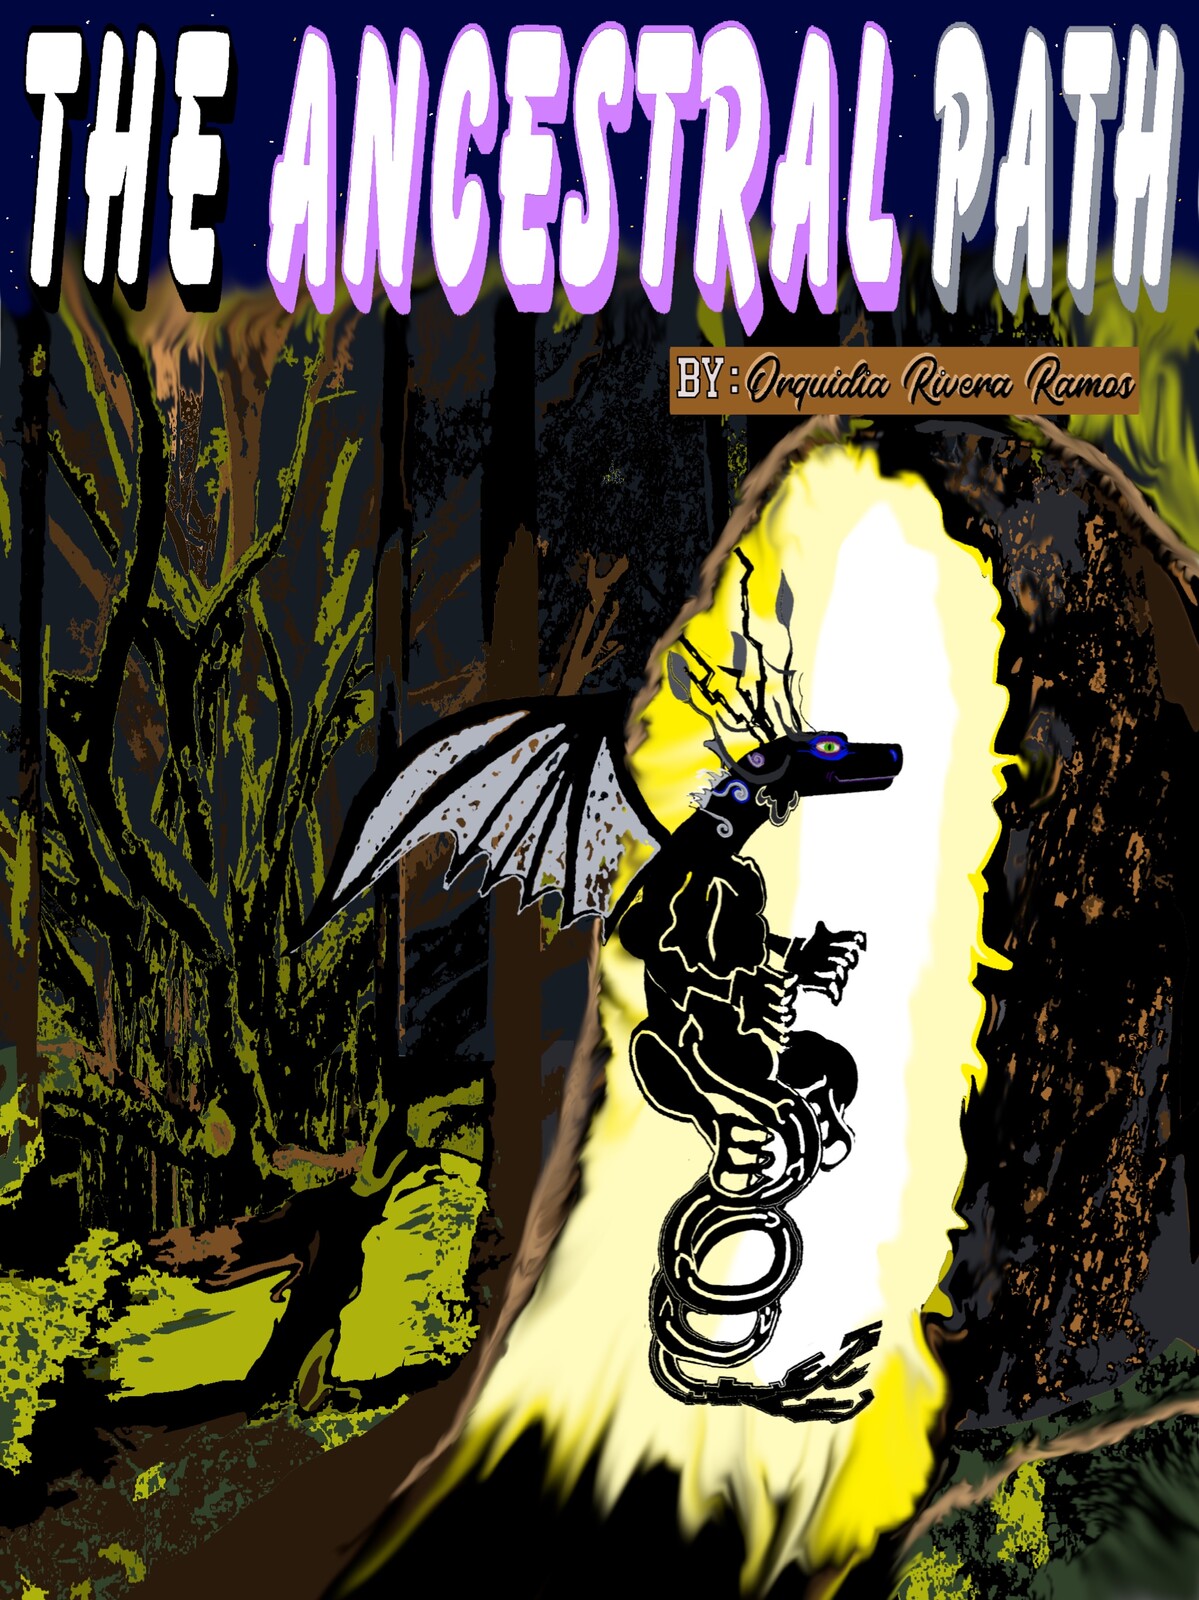 Book 2 in the VAR series, The Ancestral Path children’s and adult versions book covers